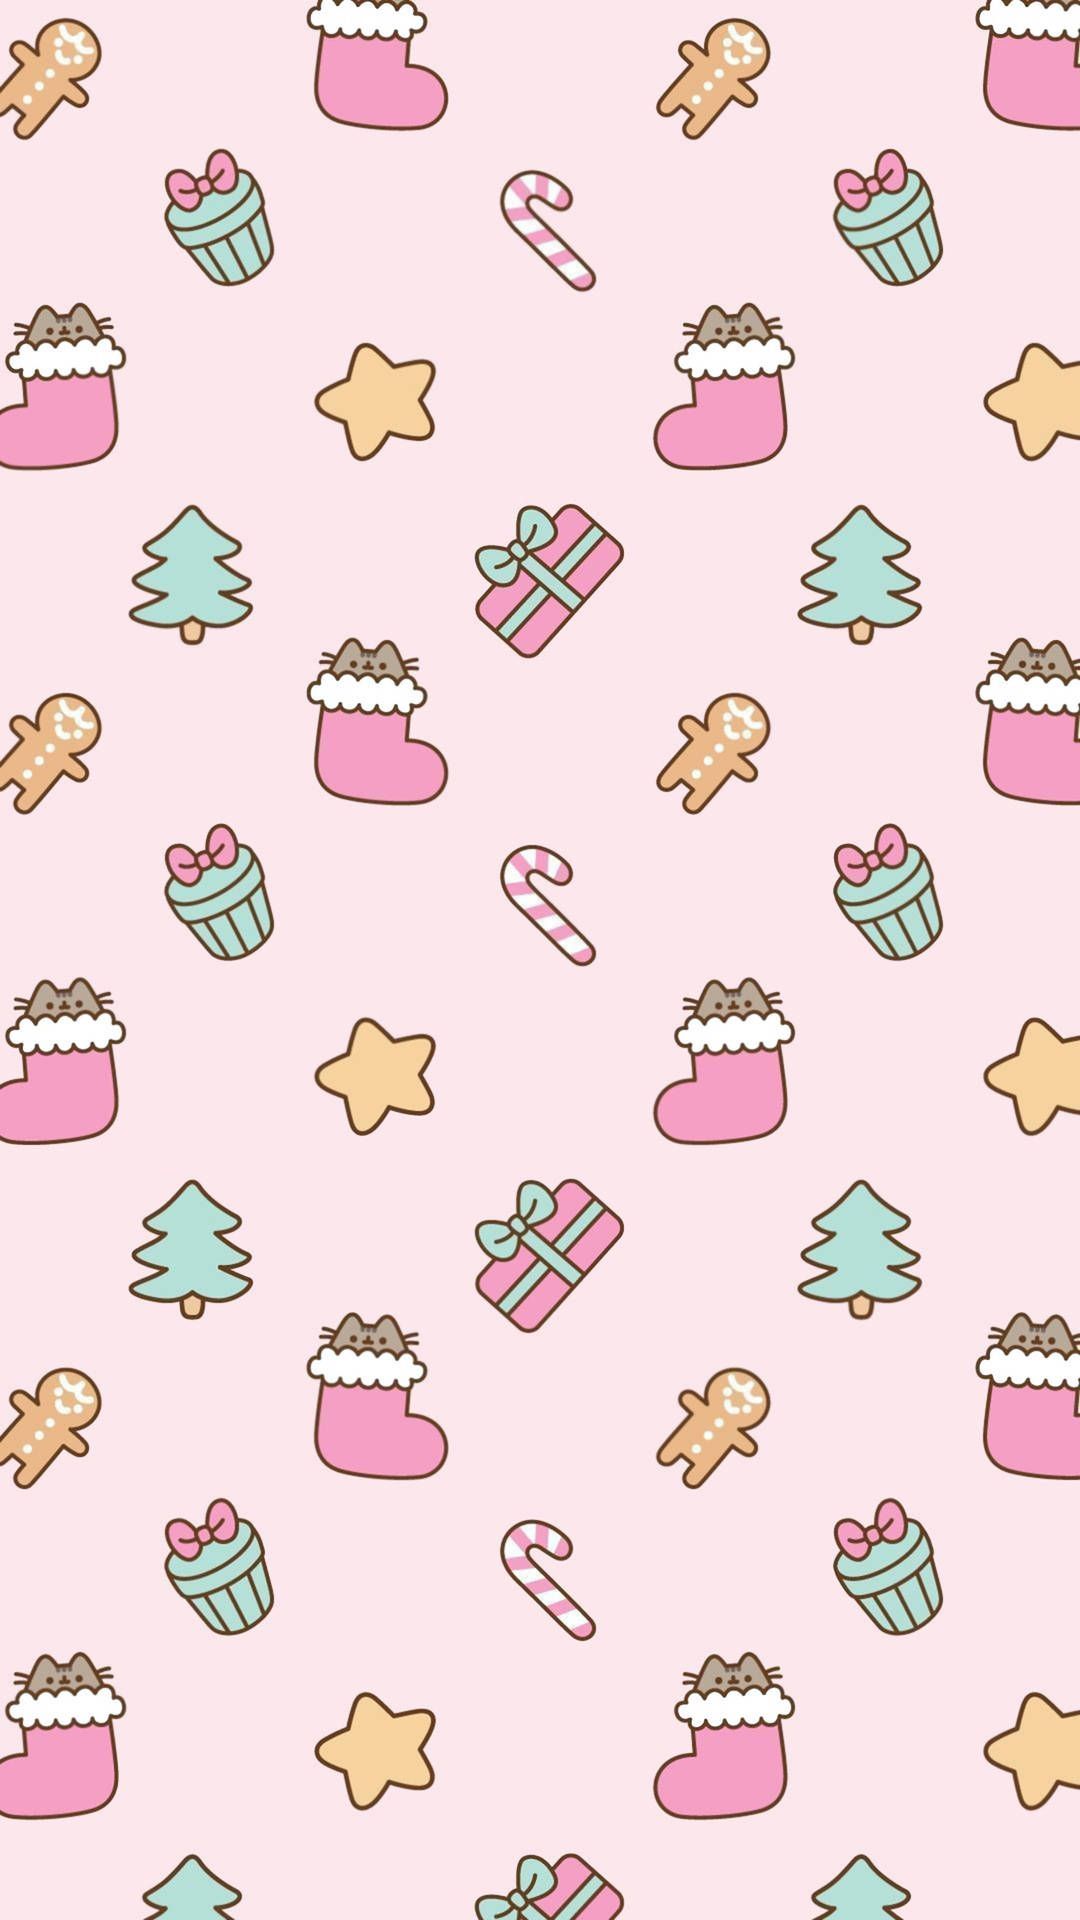 A pattern of christmas items on pink background - Cute Christmas